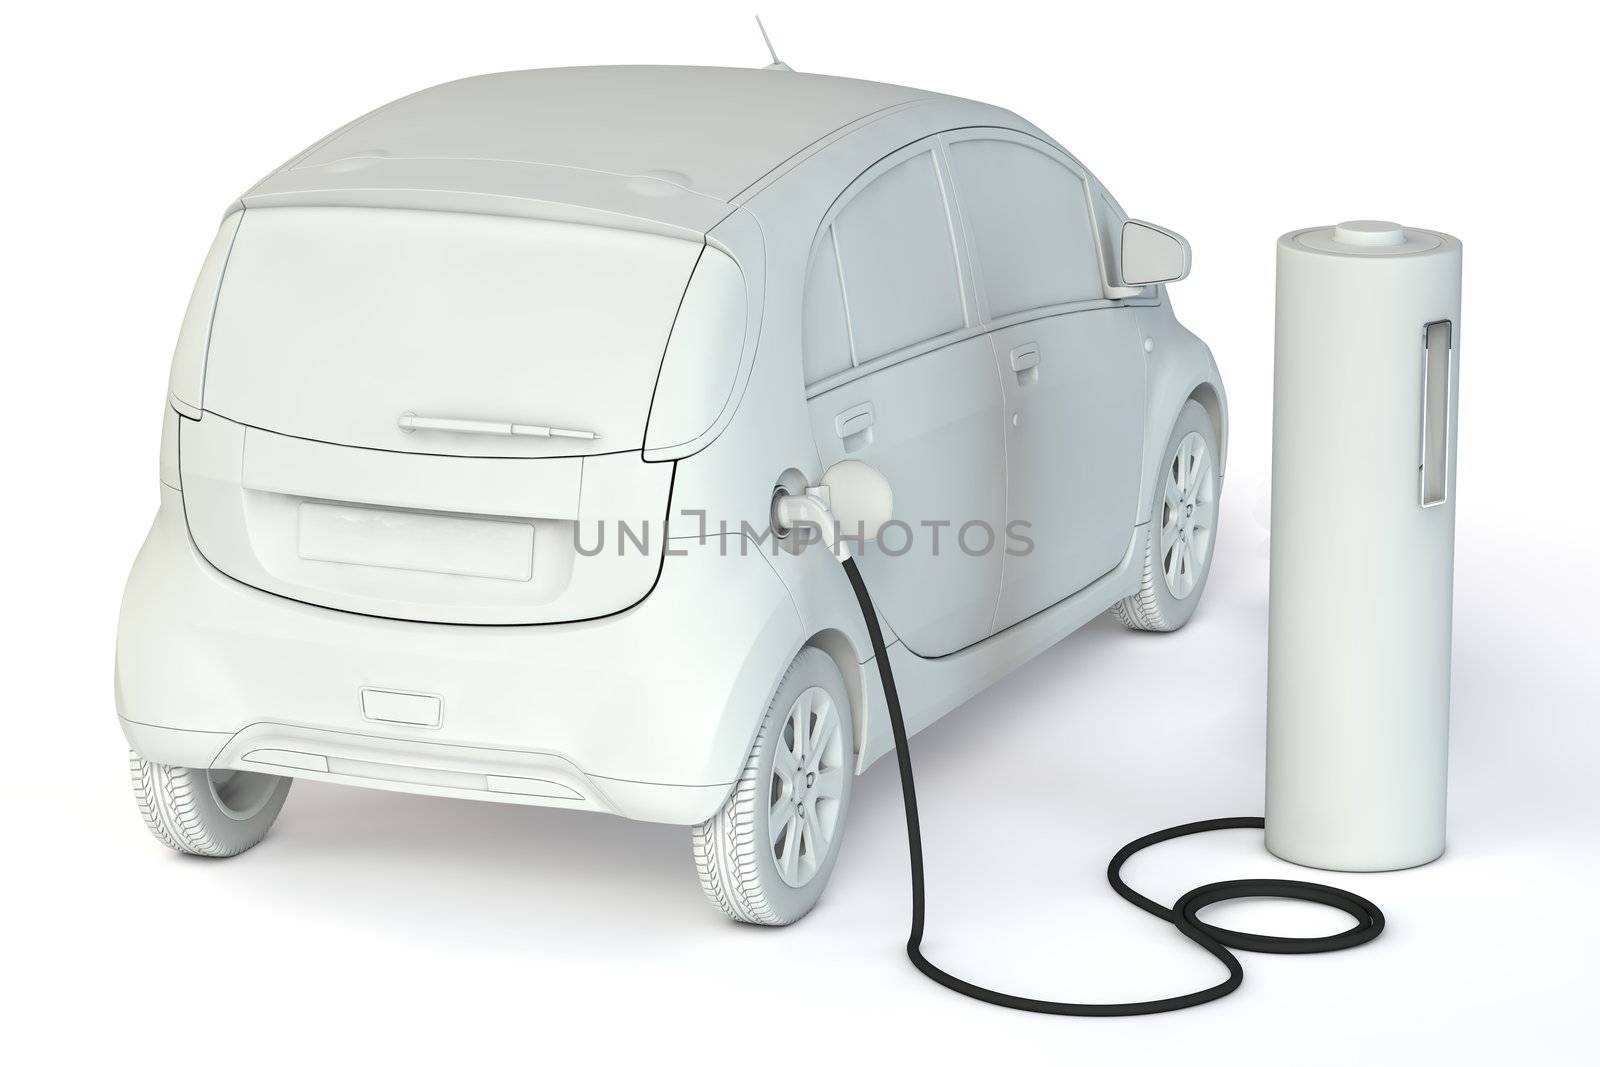 Battery Petrol Station Template - Alternative Power fuels an E-C by PixBox